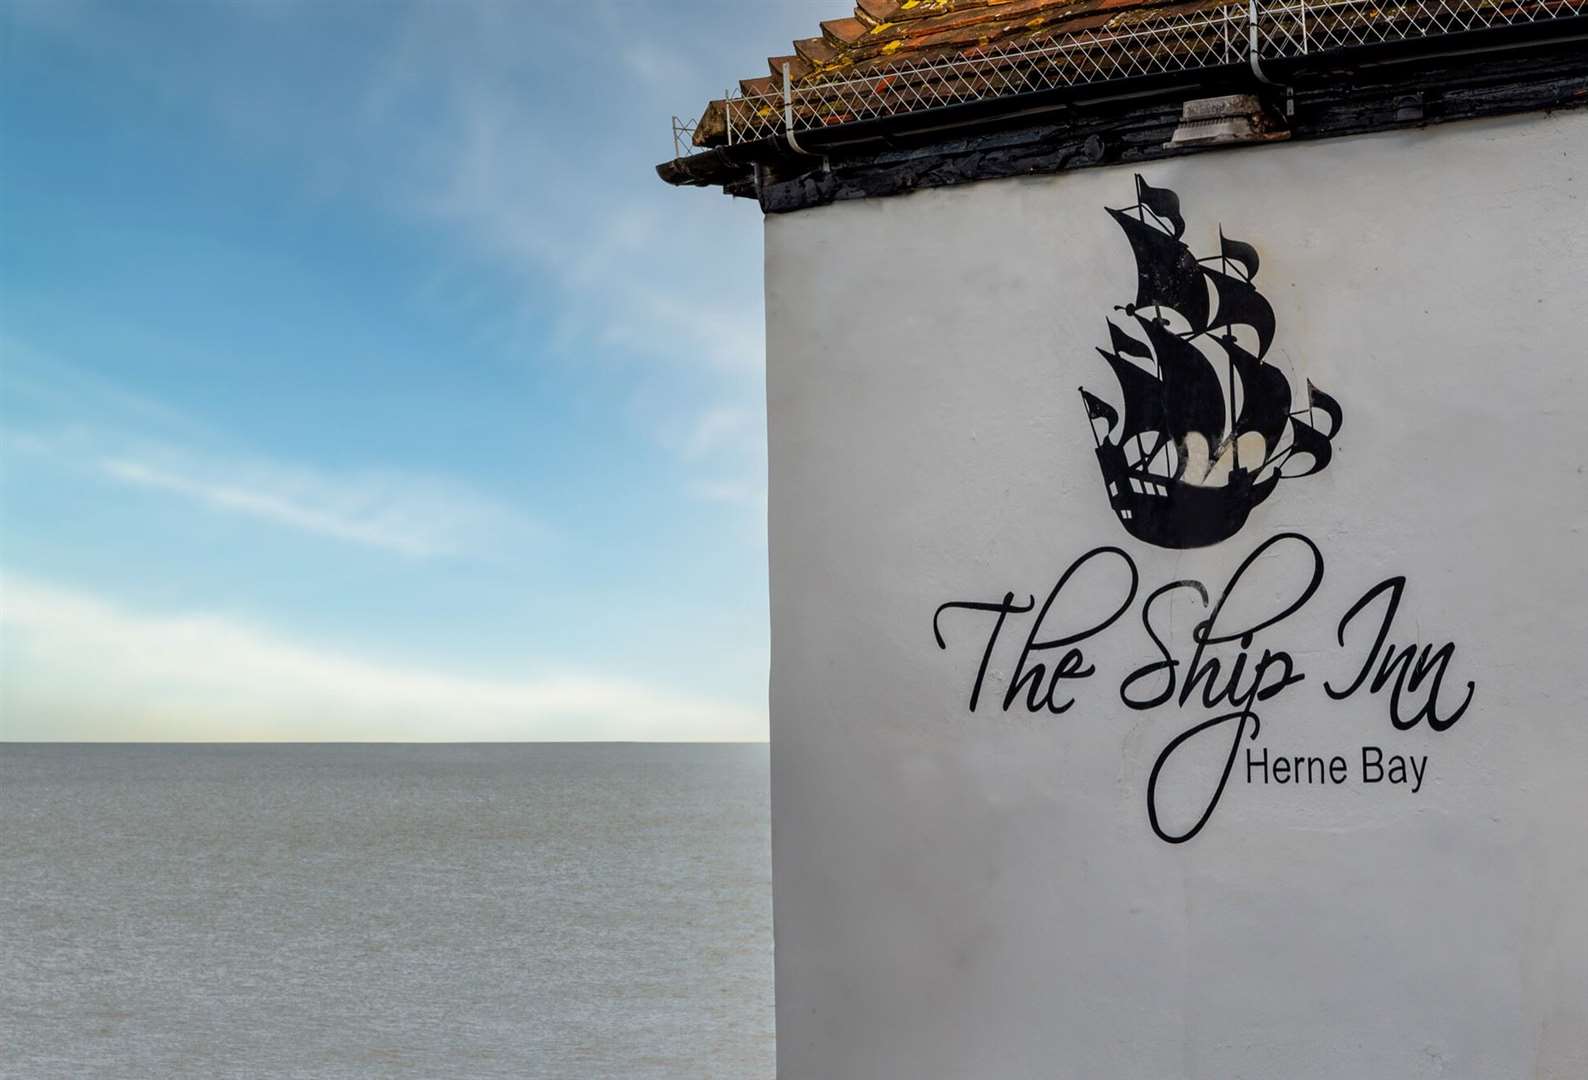 Locals feared the Ship Inn would shut for good earlier this year - but its future has now been assured